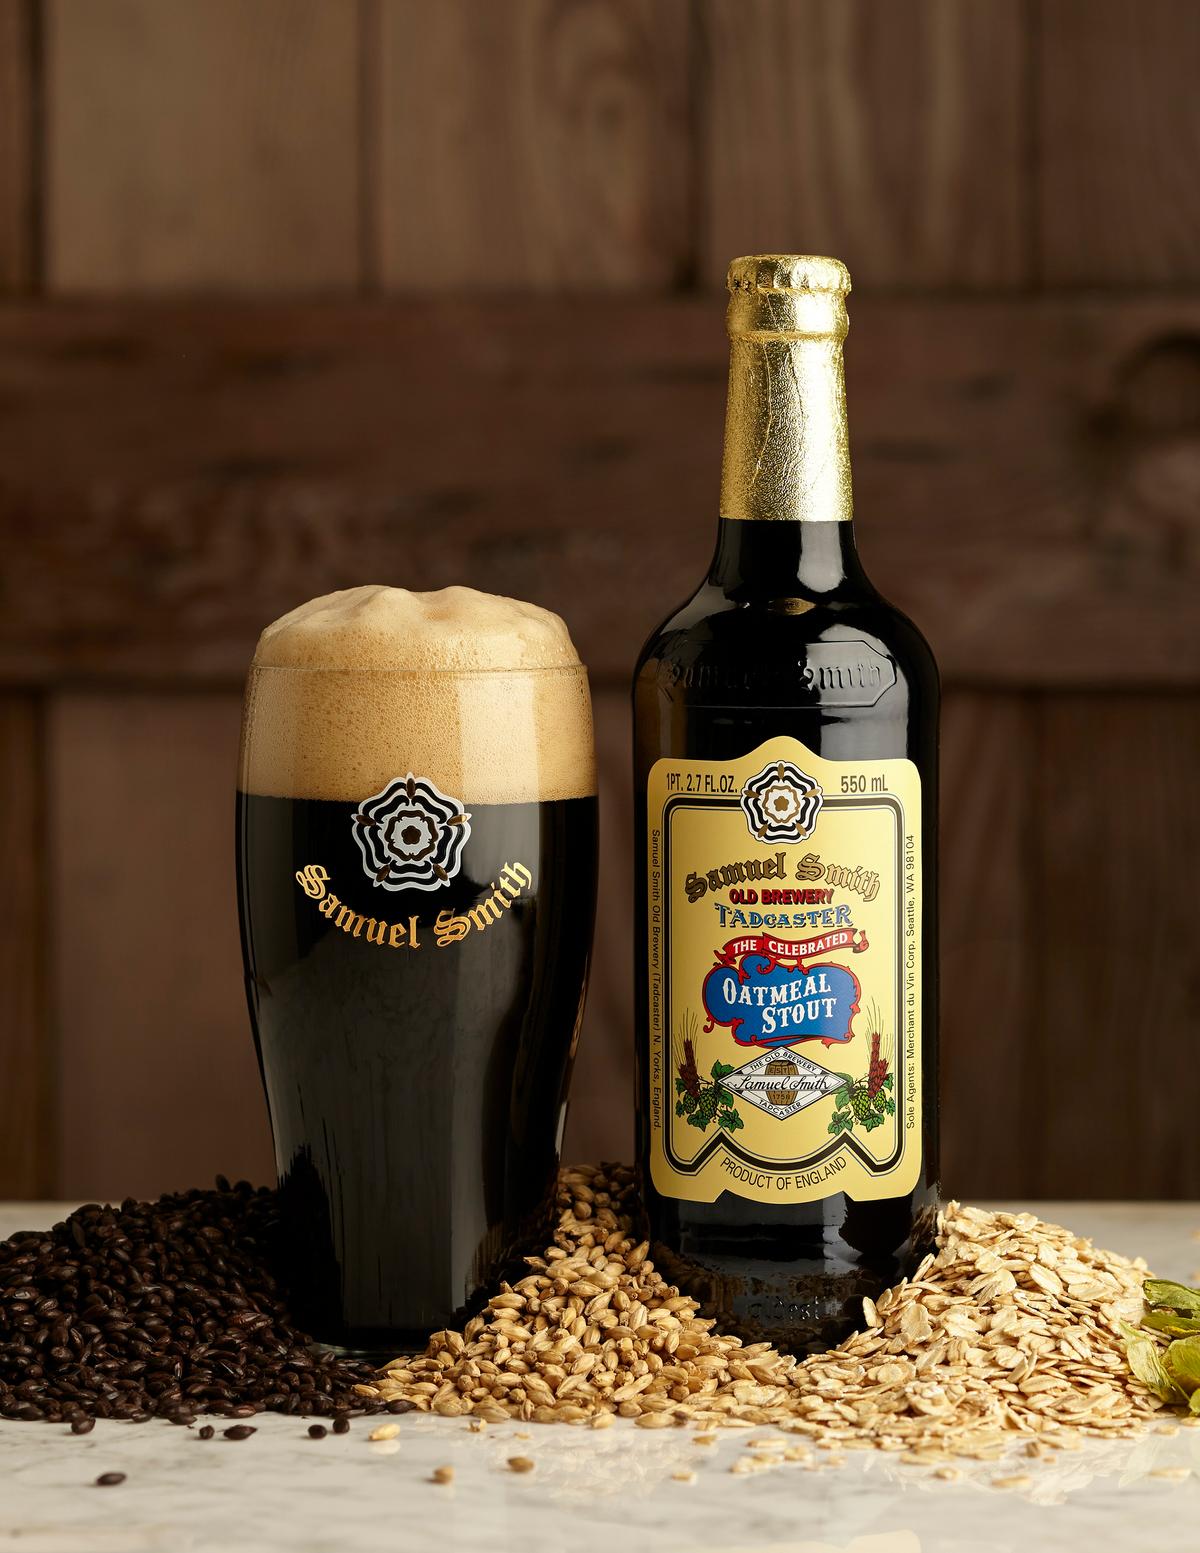 Samuel Smith's Old Brewery's Oatmeal Stout. (Courtesy of Merchant du Vin)